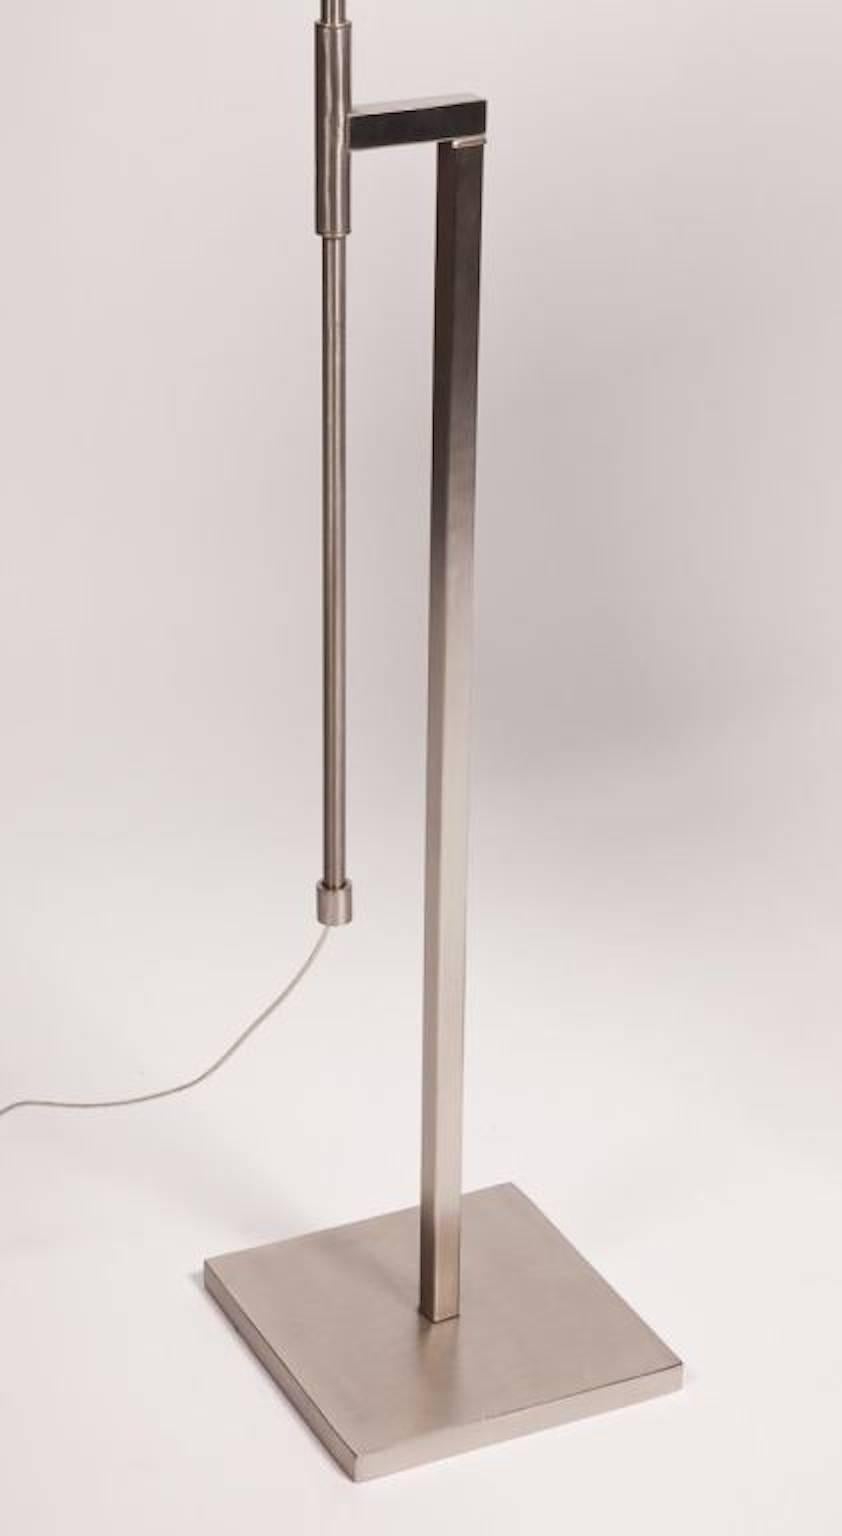 Pair of adjustable height floor lamps in custom brushed nickel finish by Laurel. Rewired with new sockets and cords. Shades not included.